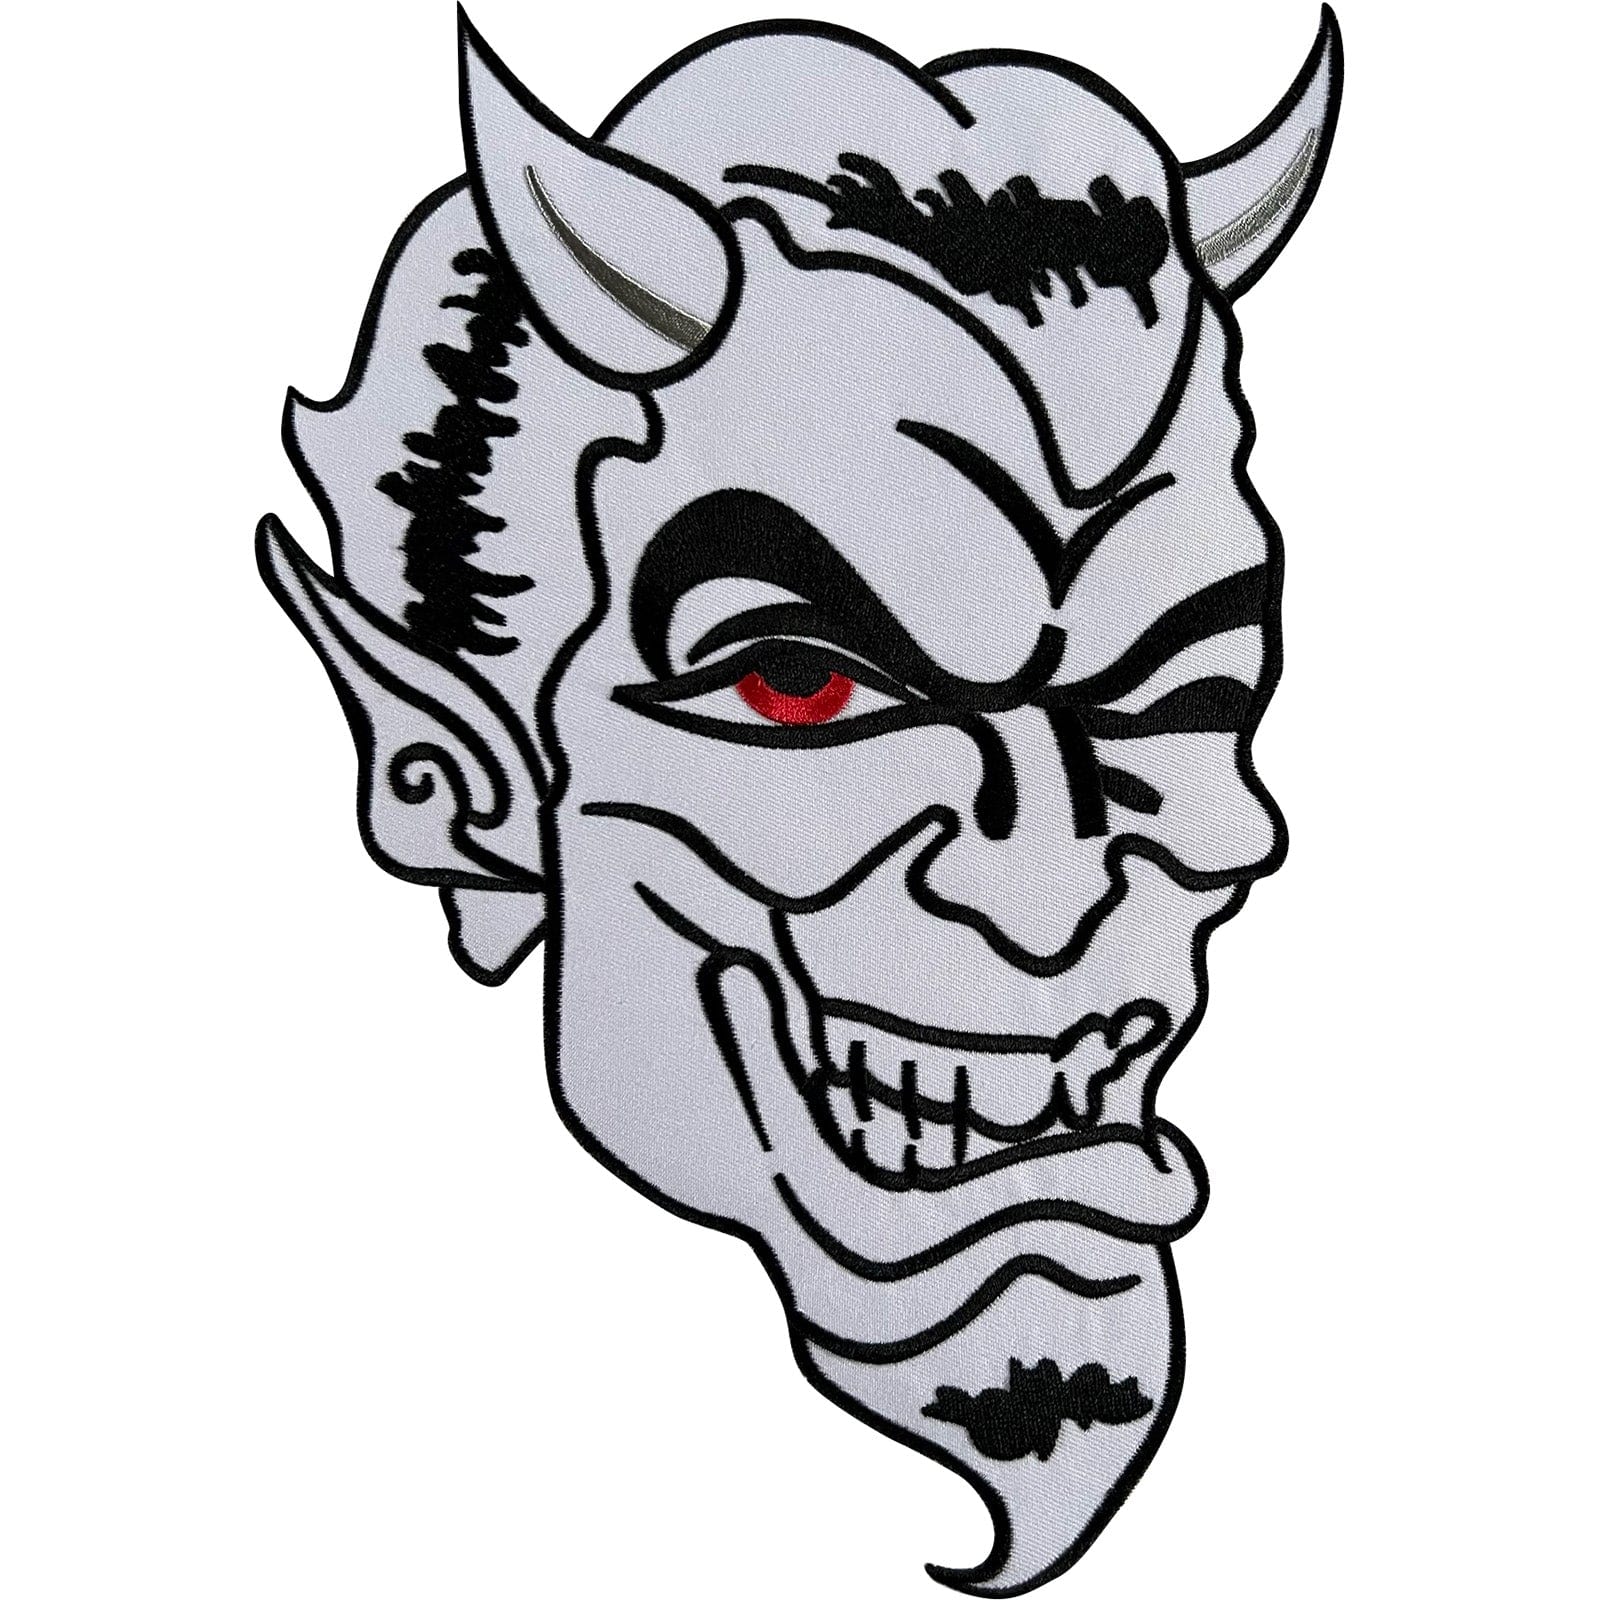 Big Large White Devil Patch Iron On Sew On Embroidered Badge Embroidery Applique